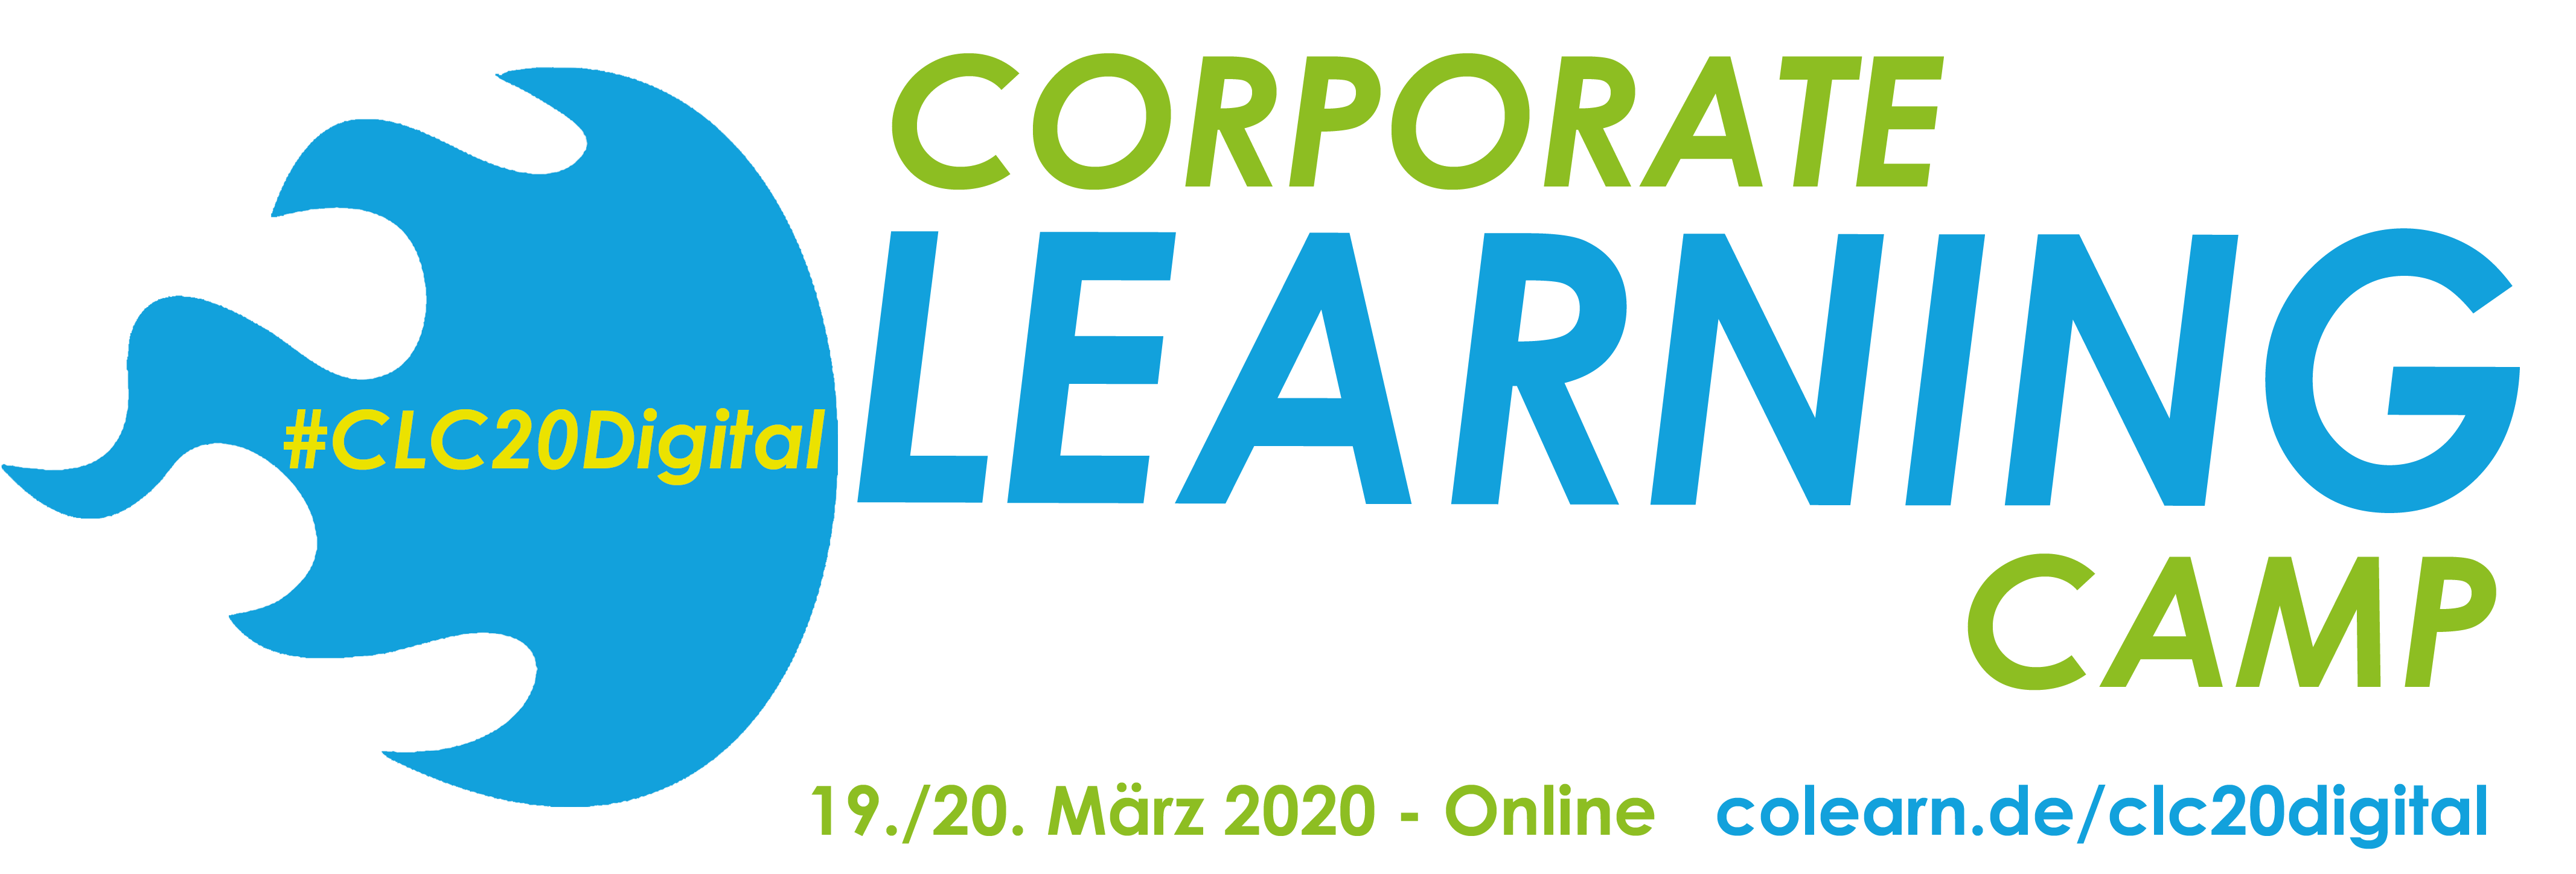 corporate learning camp